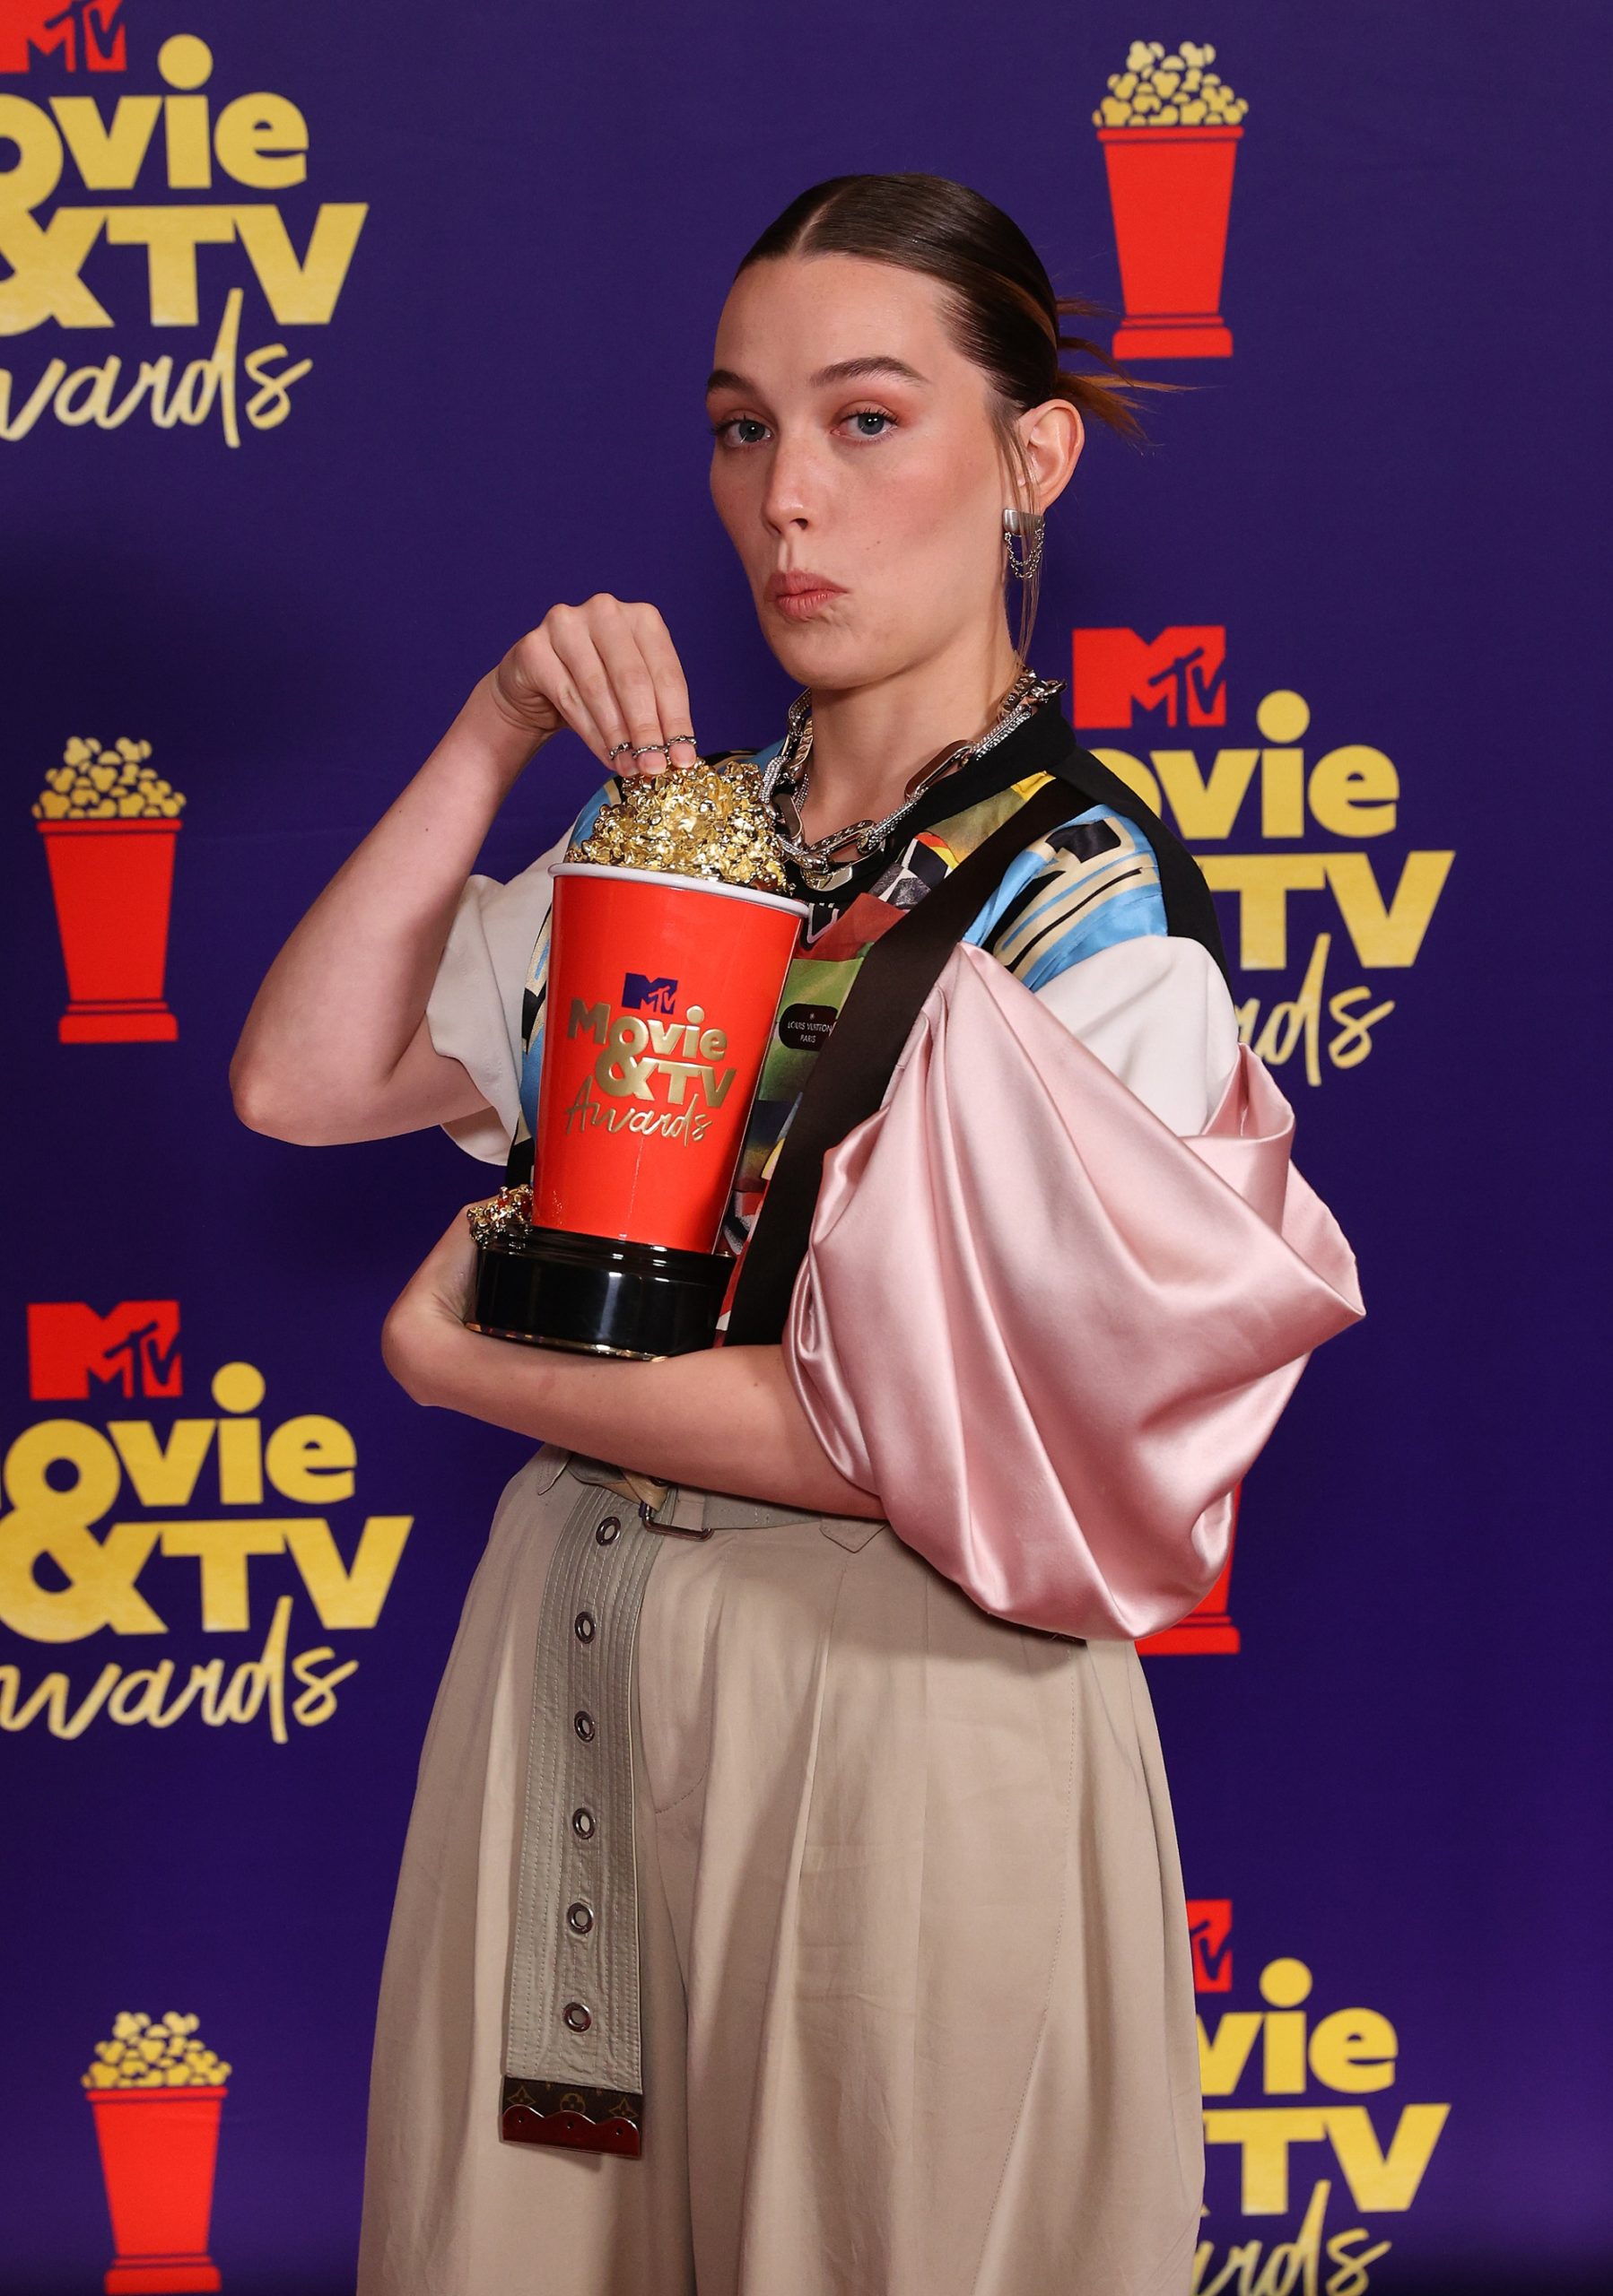 Victoria Pedretti, winner of the Most Frightened Performance award for 'The Haunting of Bly Manor,’ poses with a golden popcorn statuette backstage during the 2021 MTV Movie & TV Awards